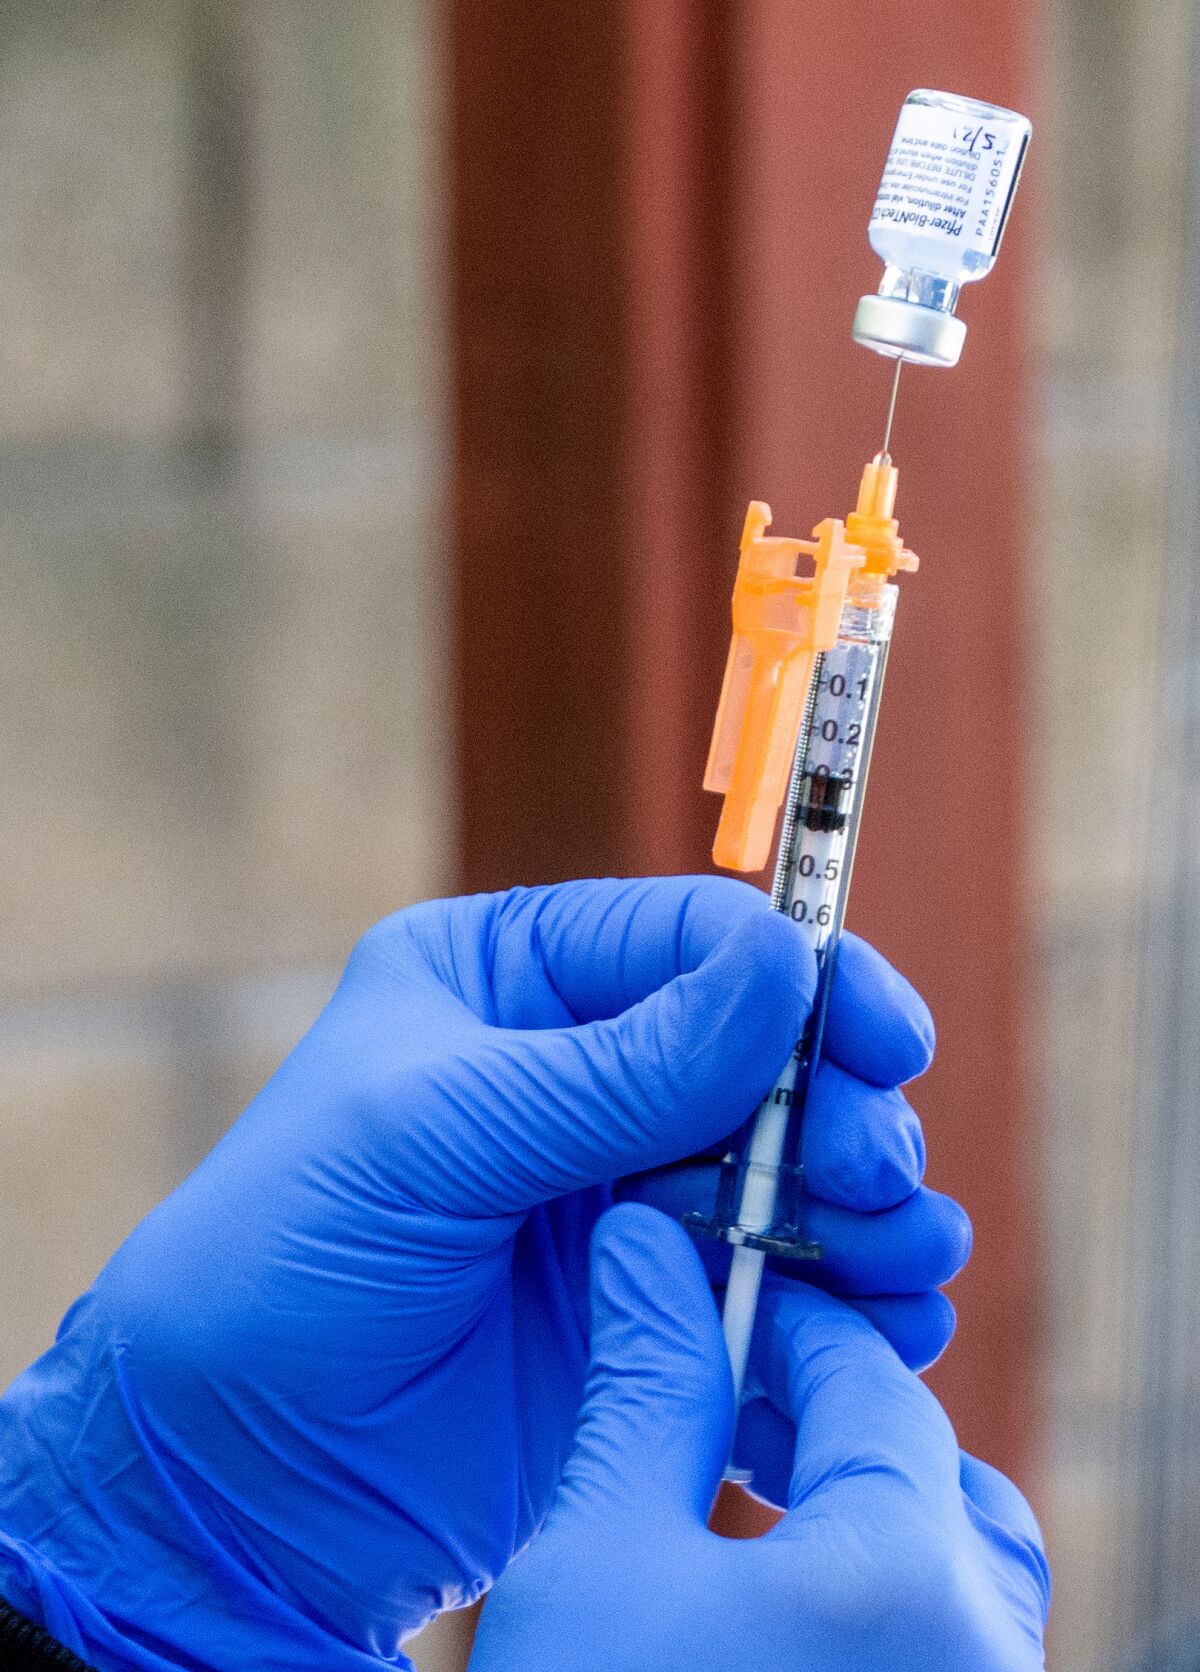 Two hands hold up a needle inserted into a vial.